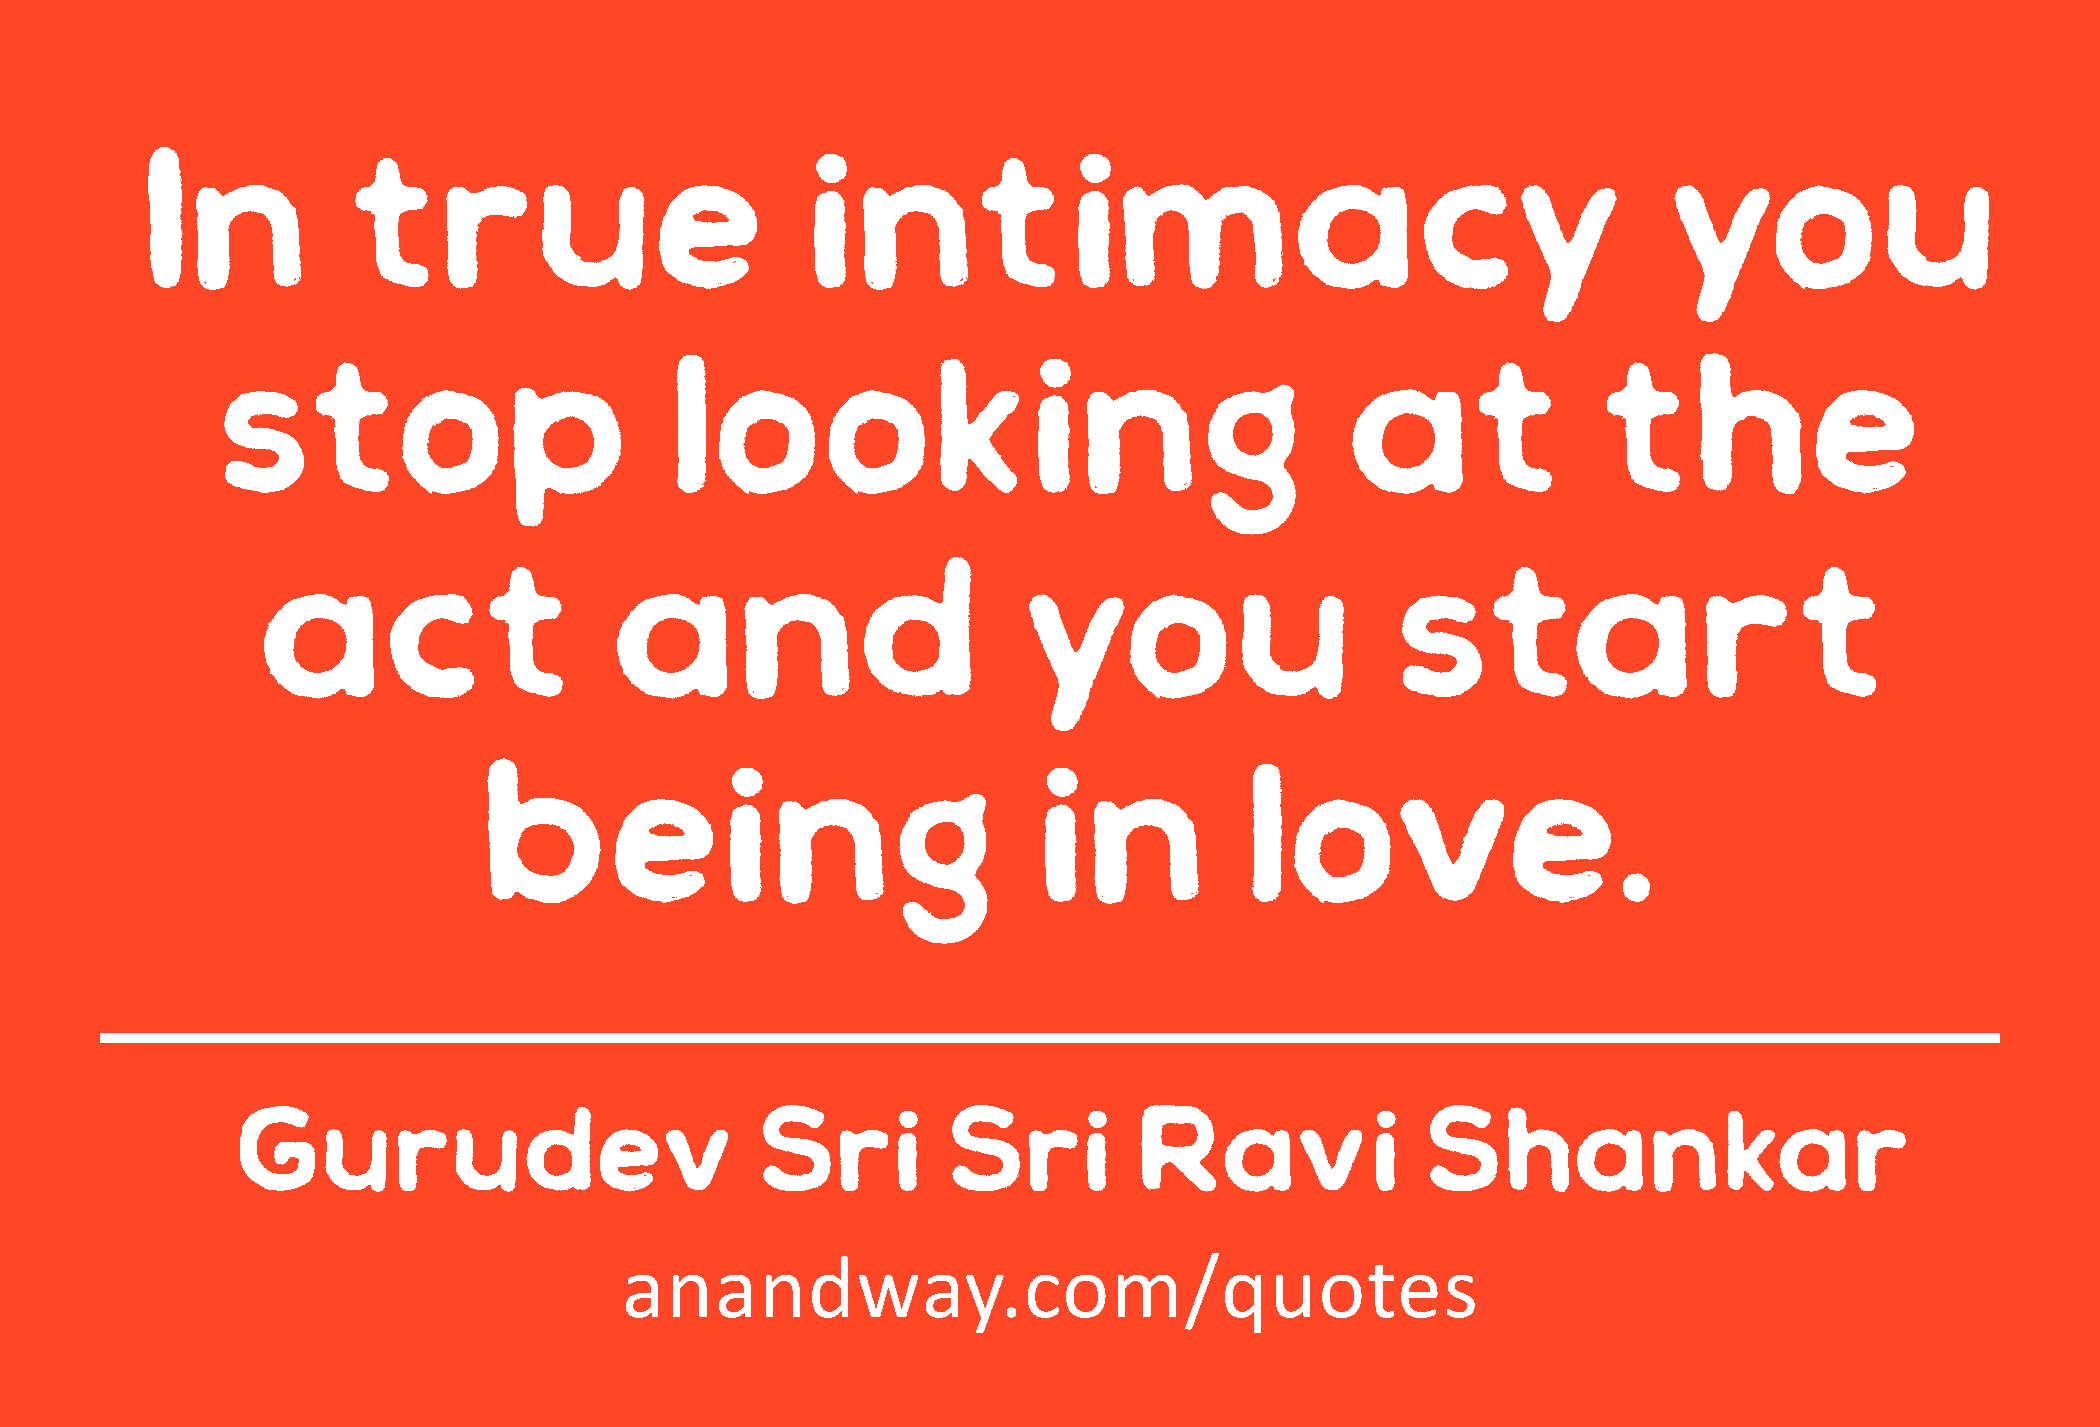 In true intimacy you stop looking at the act and you start being in love. 
 -Gurudev Sri Sri Ravi Shankar